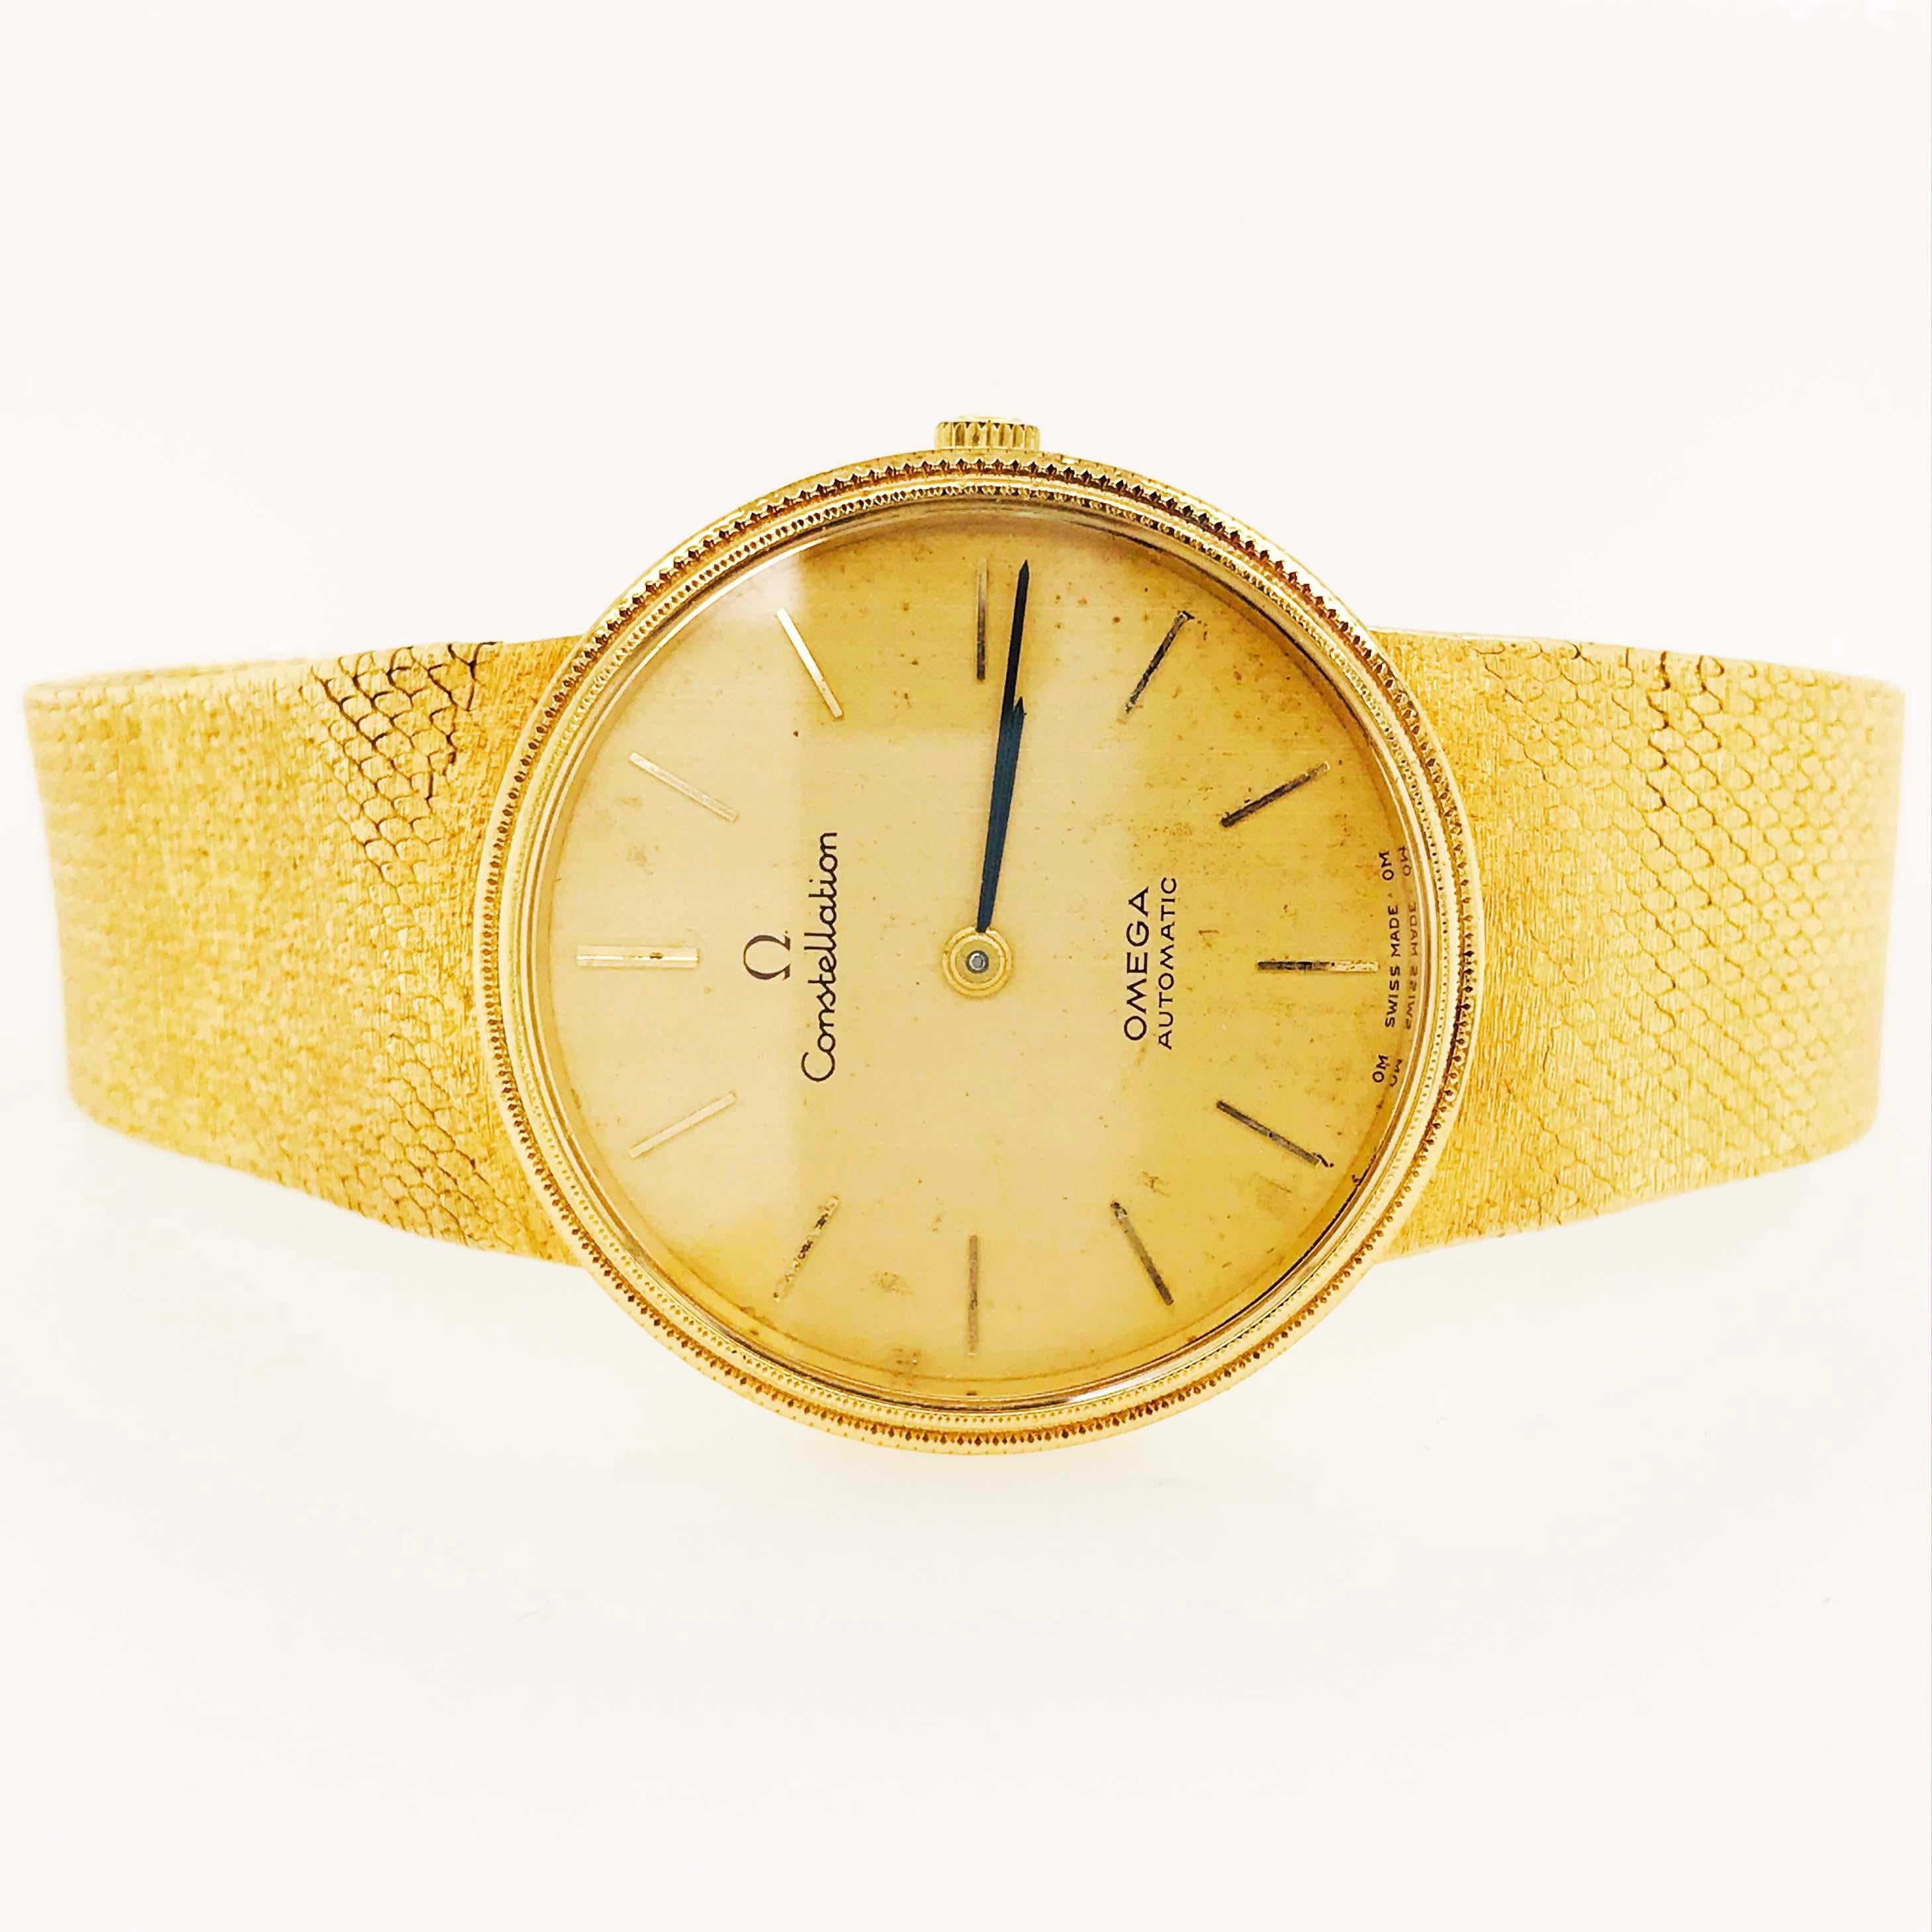 This genuine 18 karat yellow gold Omega Constellation watch is a timepiece that endures all ages!  Circa 1996 it has an 18 karat gold mesh band, clasp, case, dial, and face.  The round shape looks great on a medium to large size man's or woman's